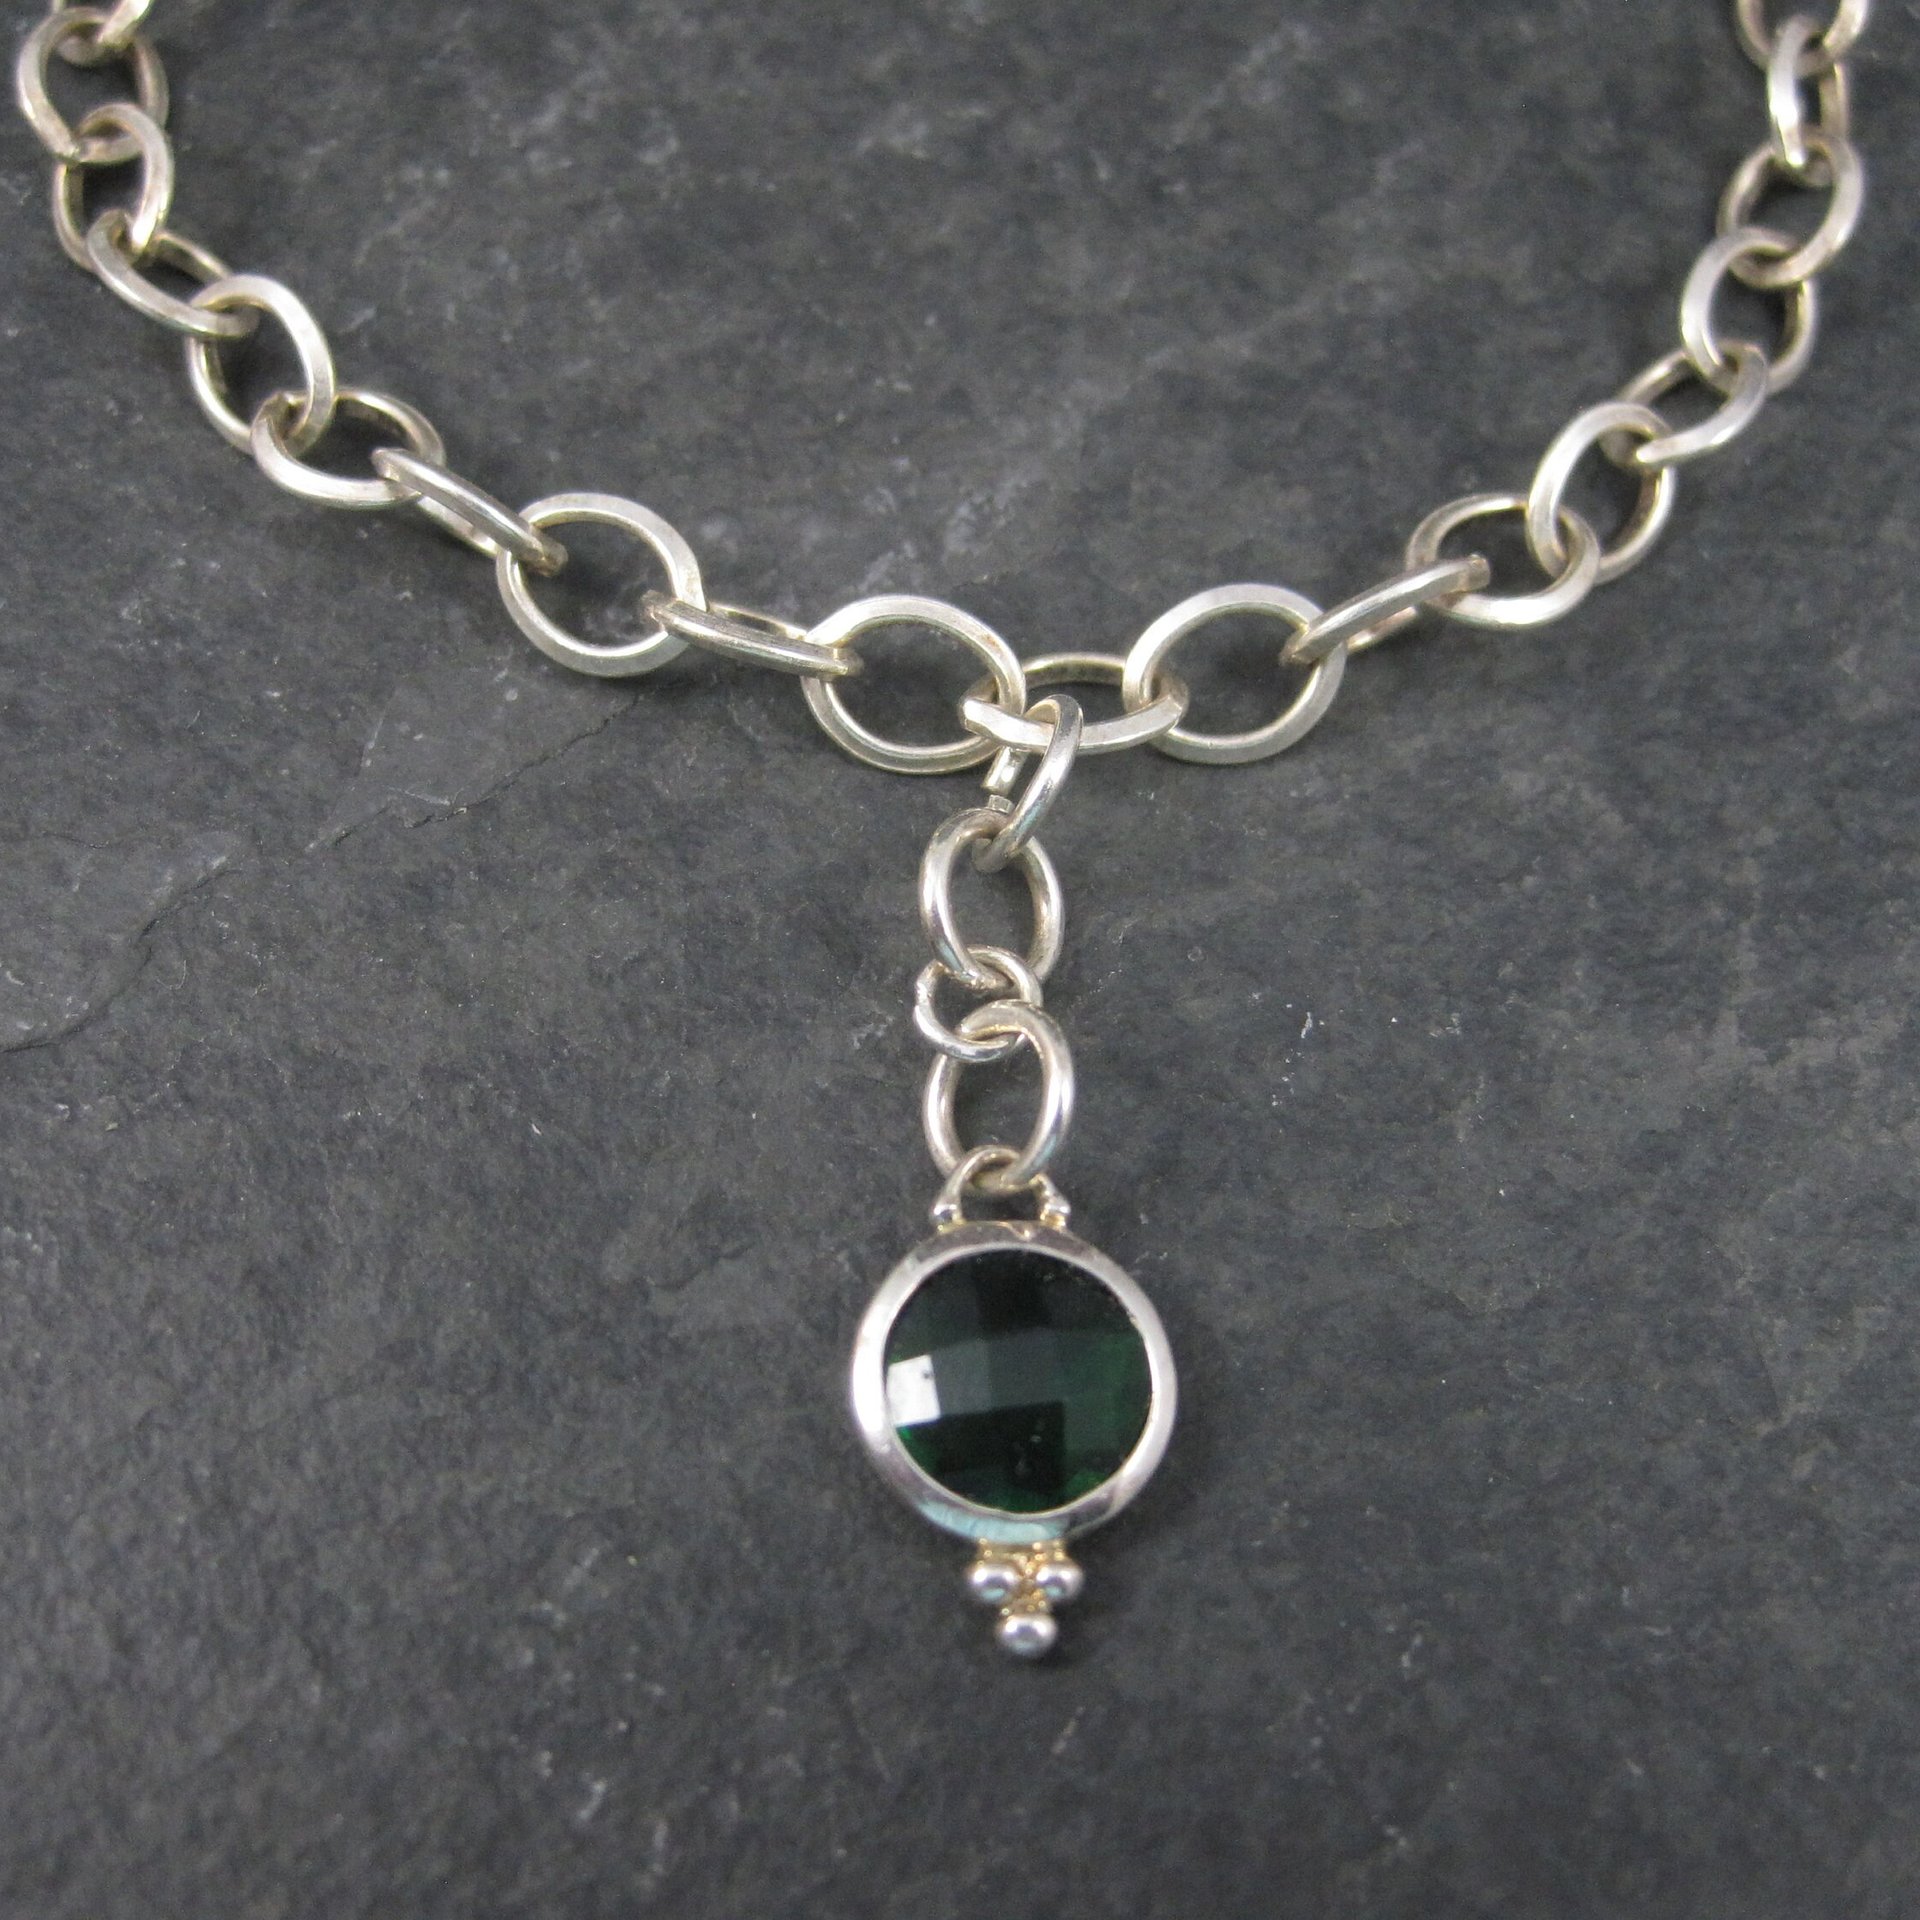 Vintage Sterling May Birthstone Charm Bracelet 7.5 Inches